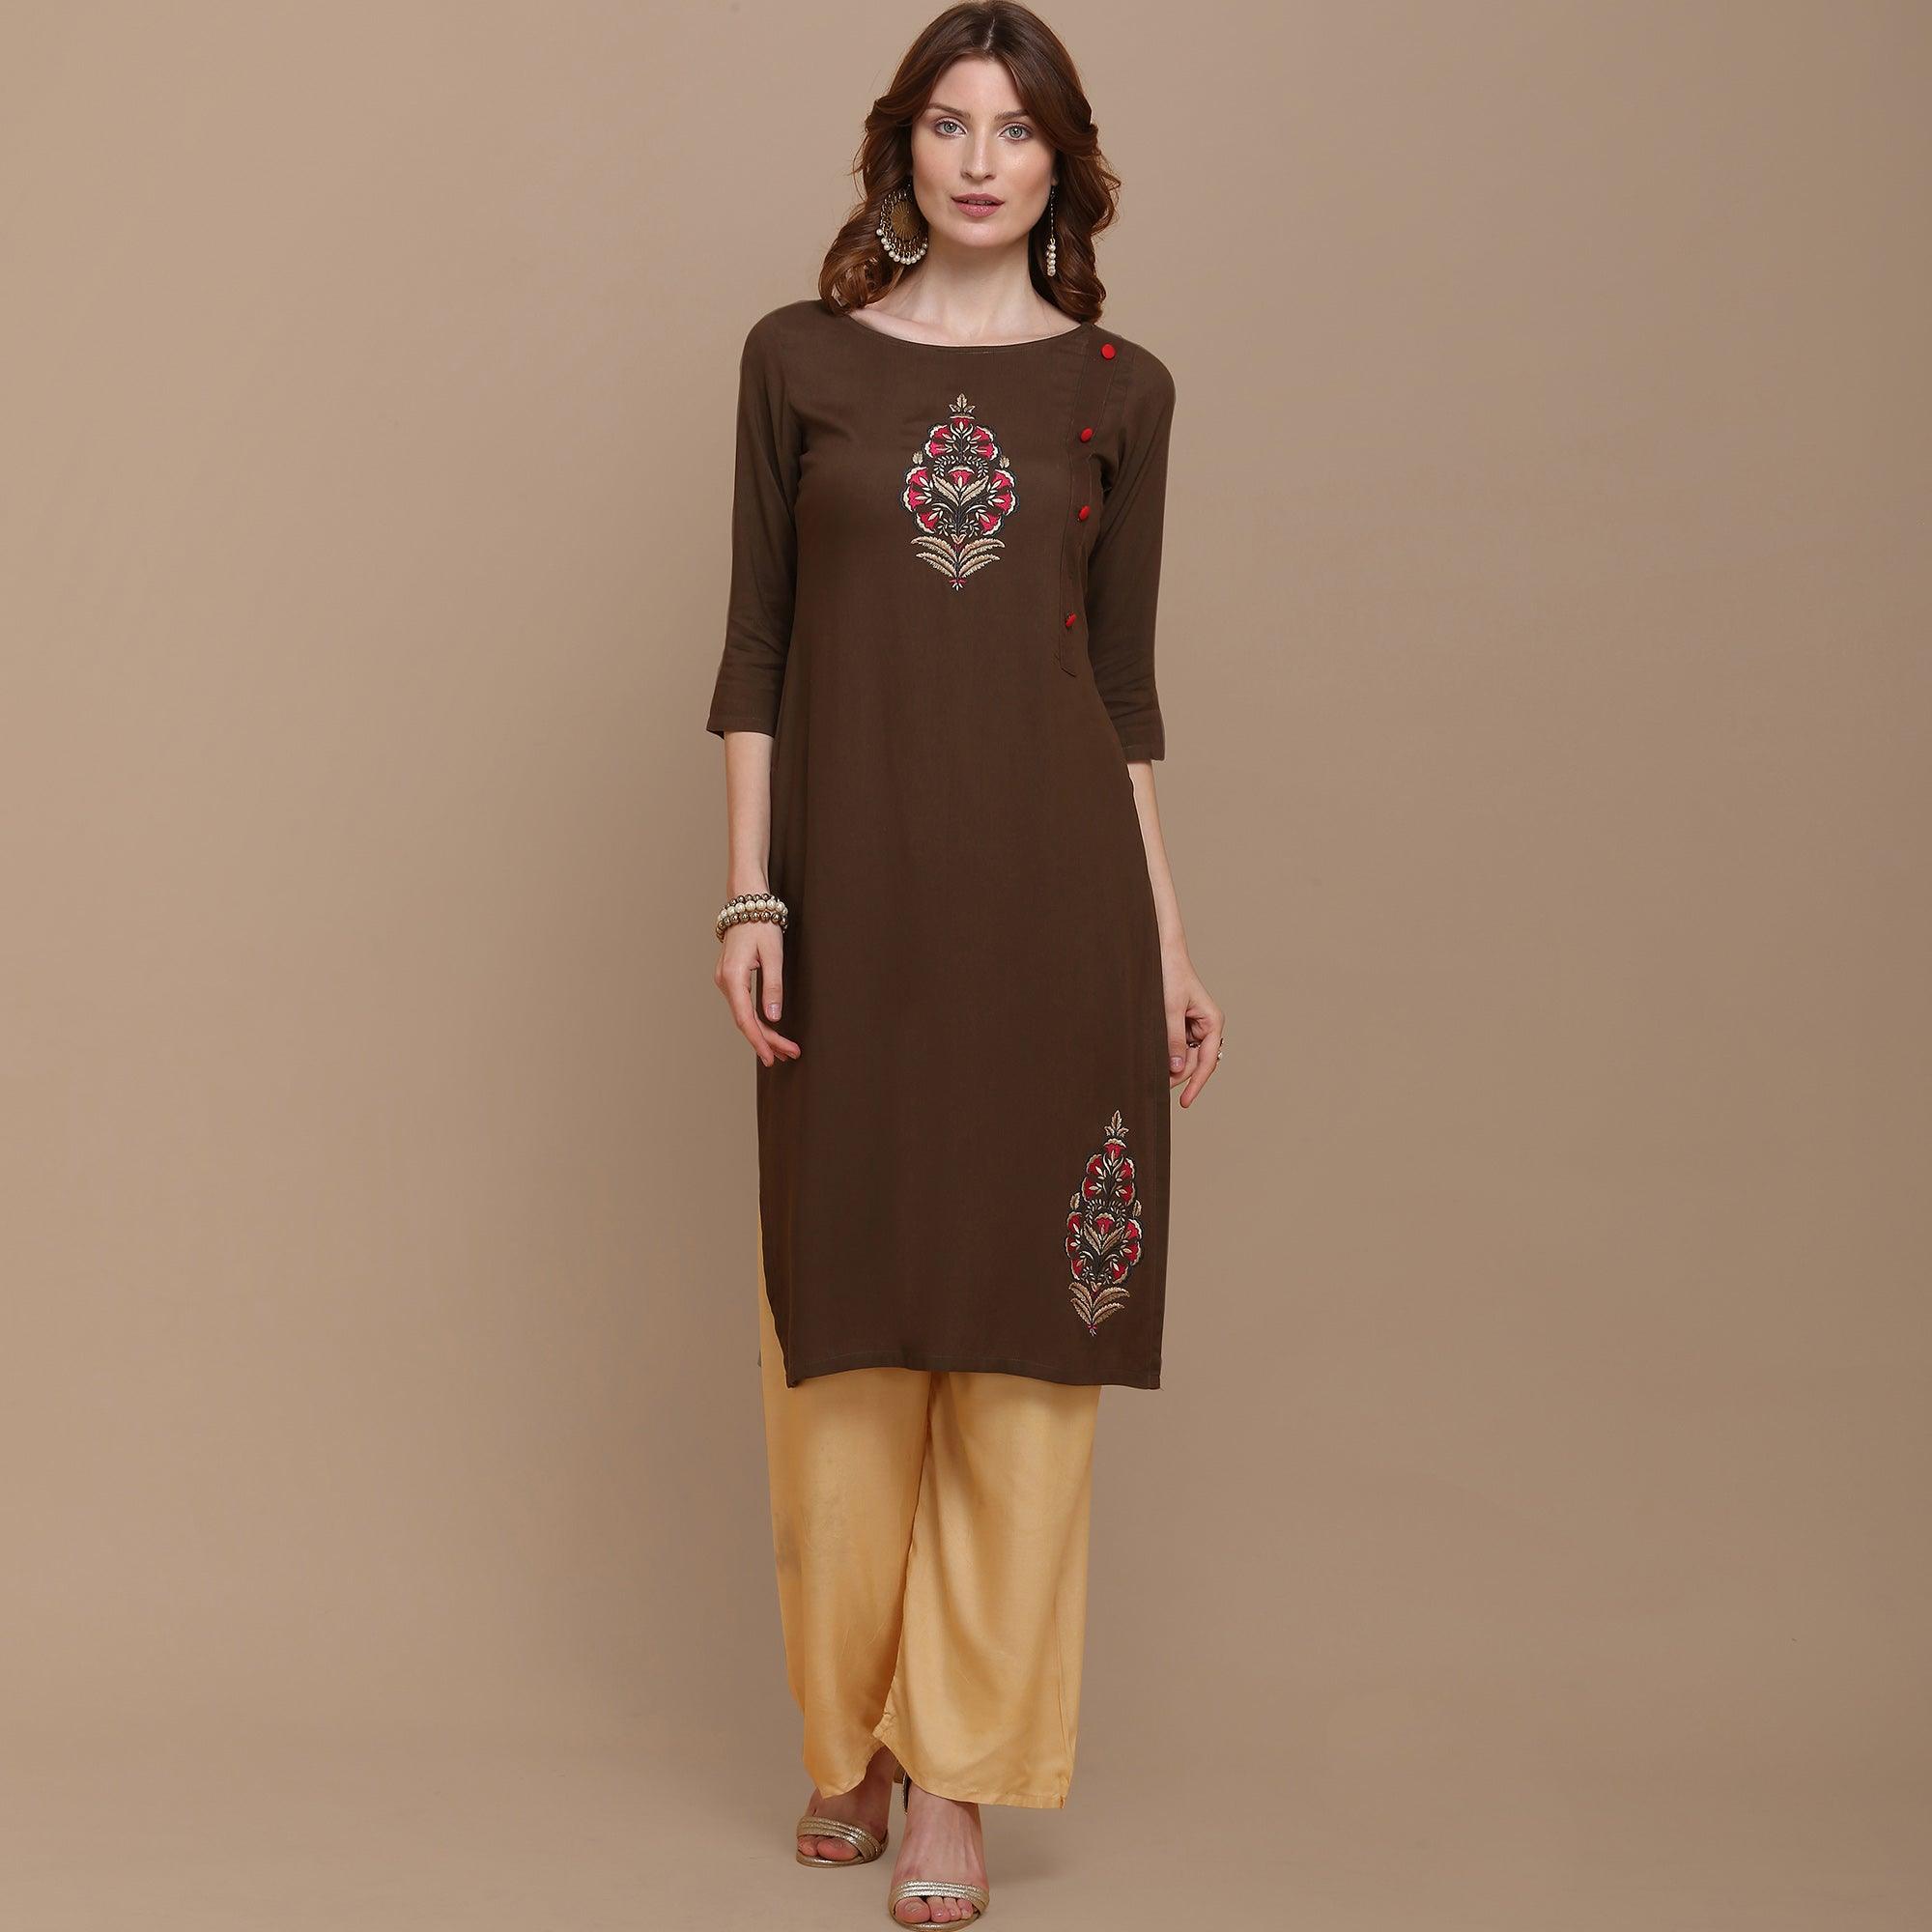 Capricious Brown Colored Partywear Embroidered Rayon Kurti - Peachmode